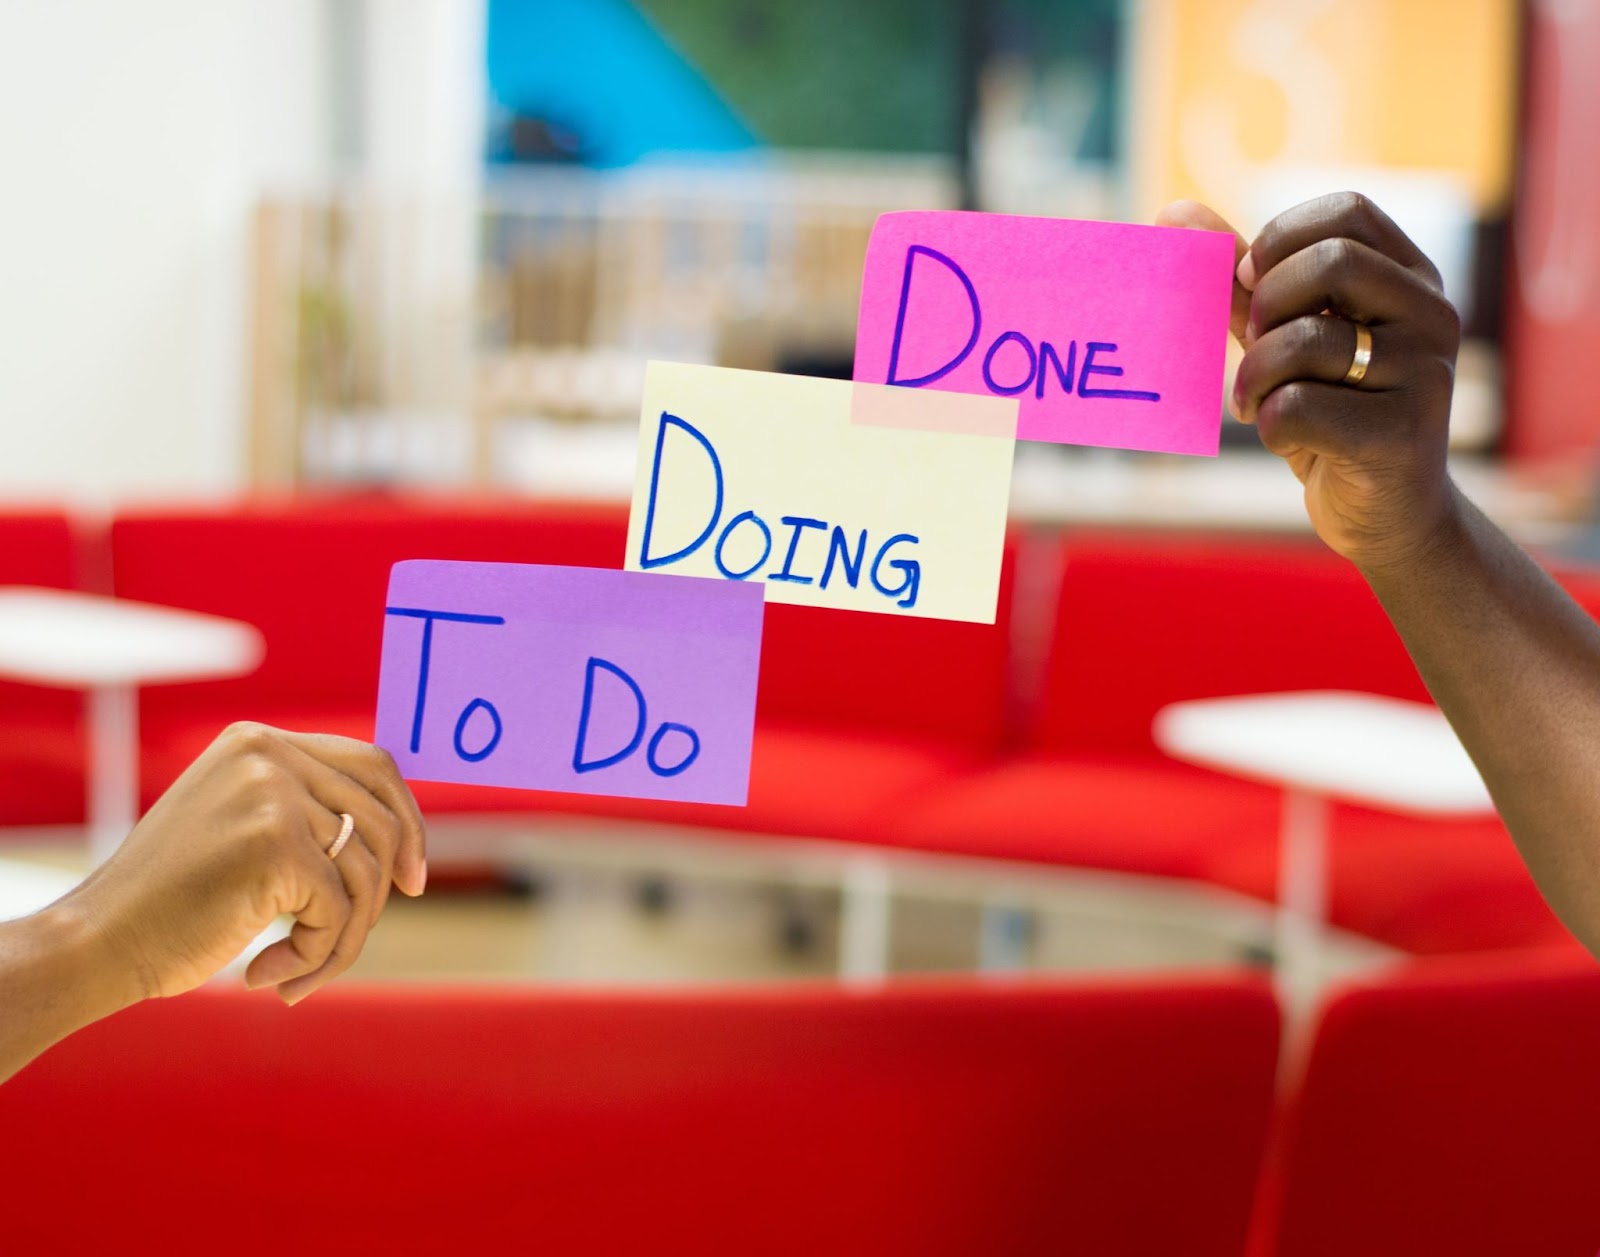 Hands holding up post-it notes with: "to do, doing, done" written on them.